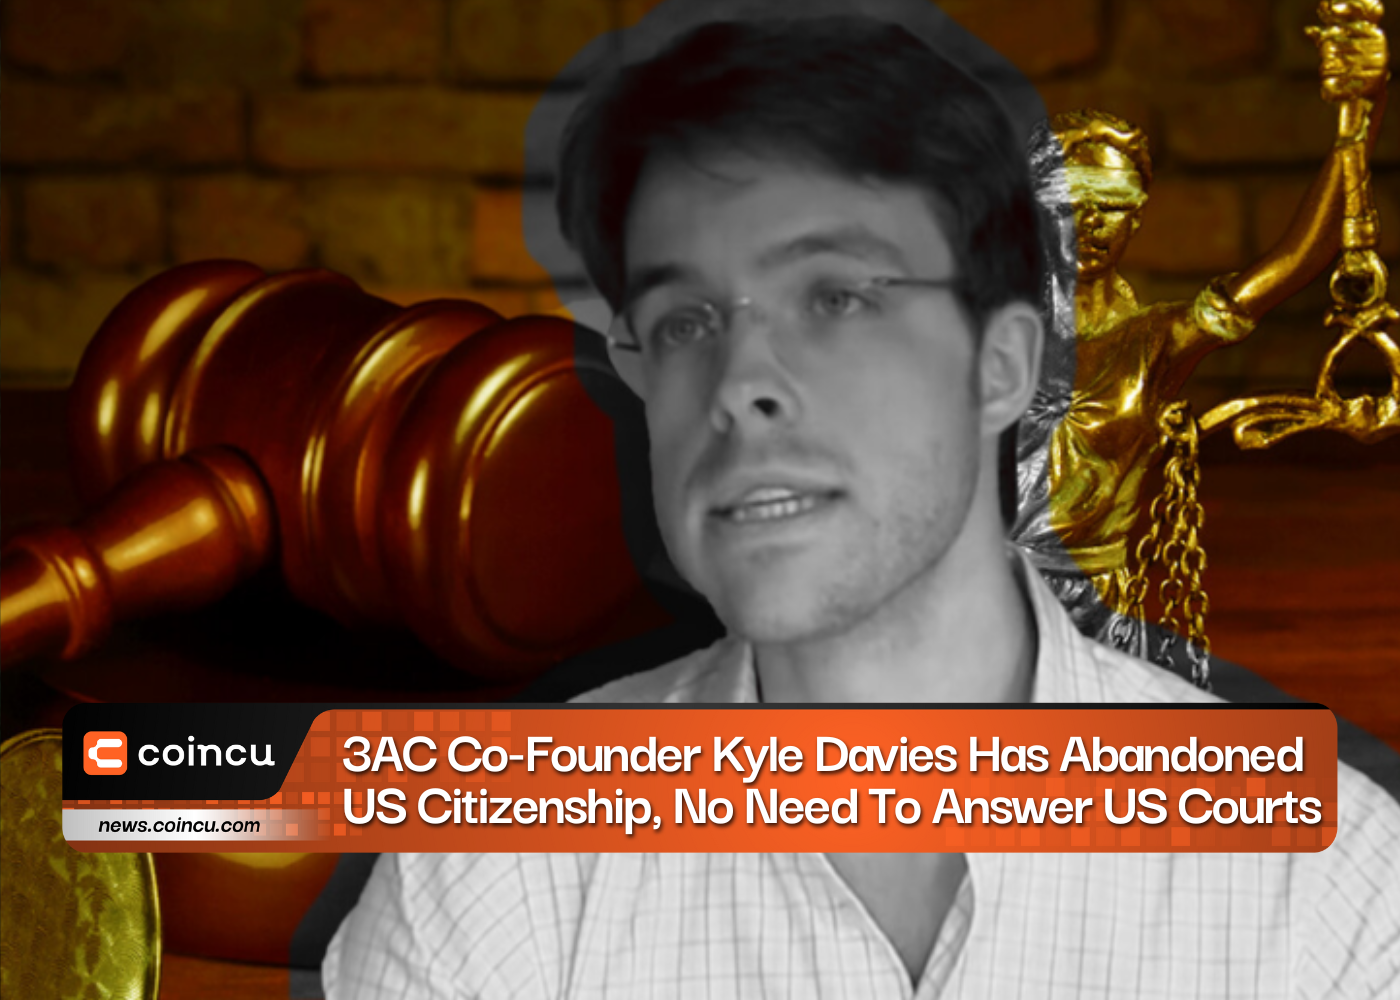 3AC Co-Founder Kyle Davies Has Abandoned US Citizenship, No Need To Answer US Courts